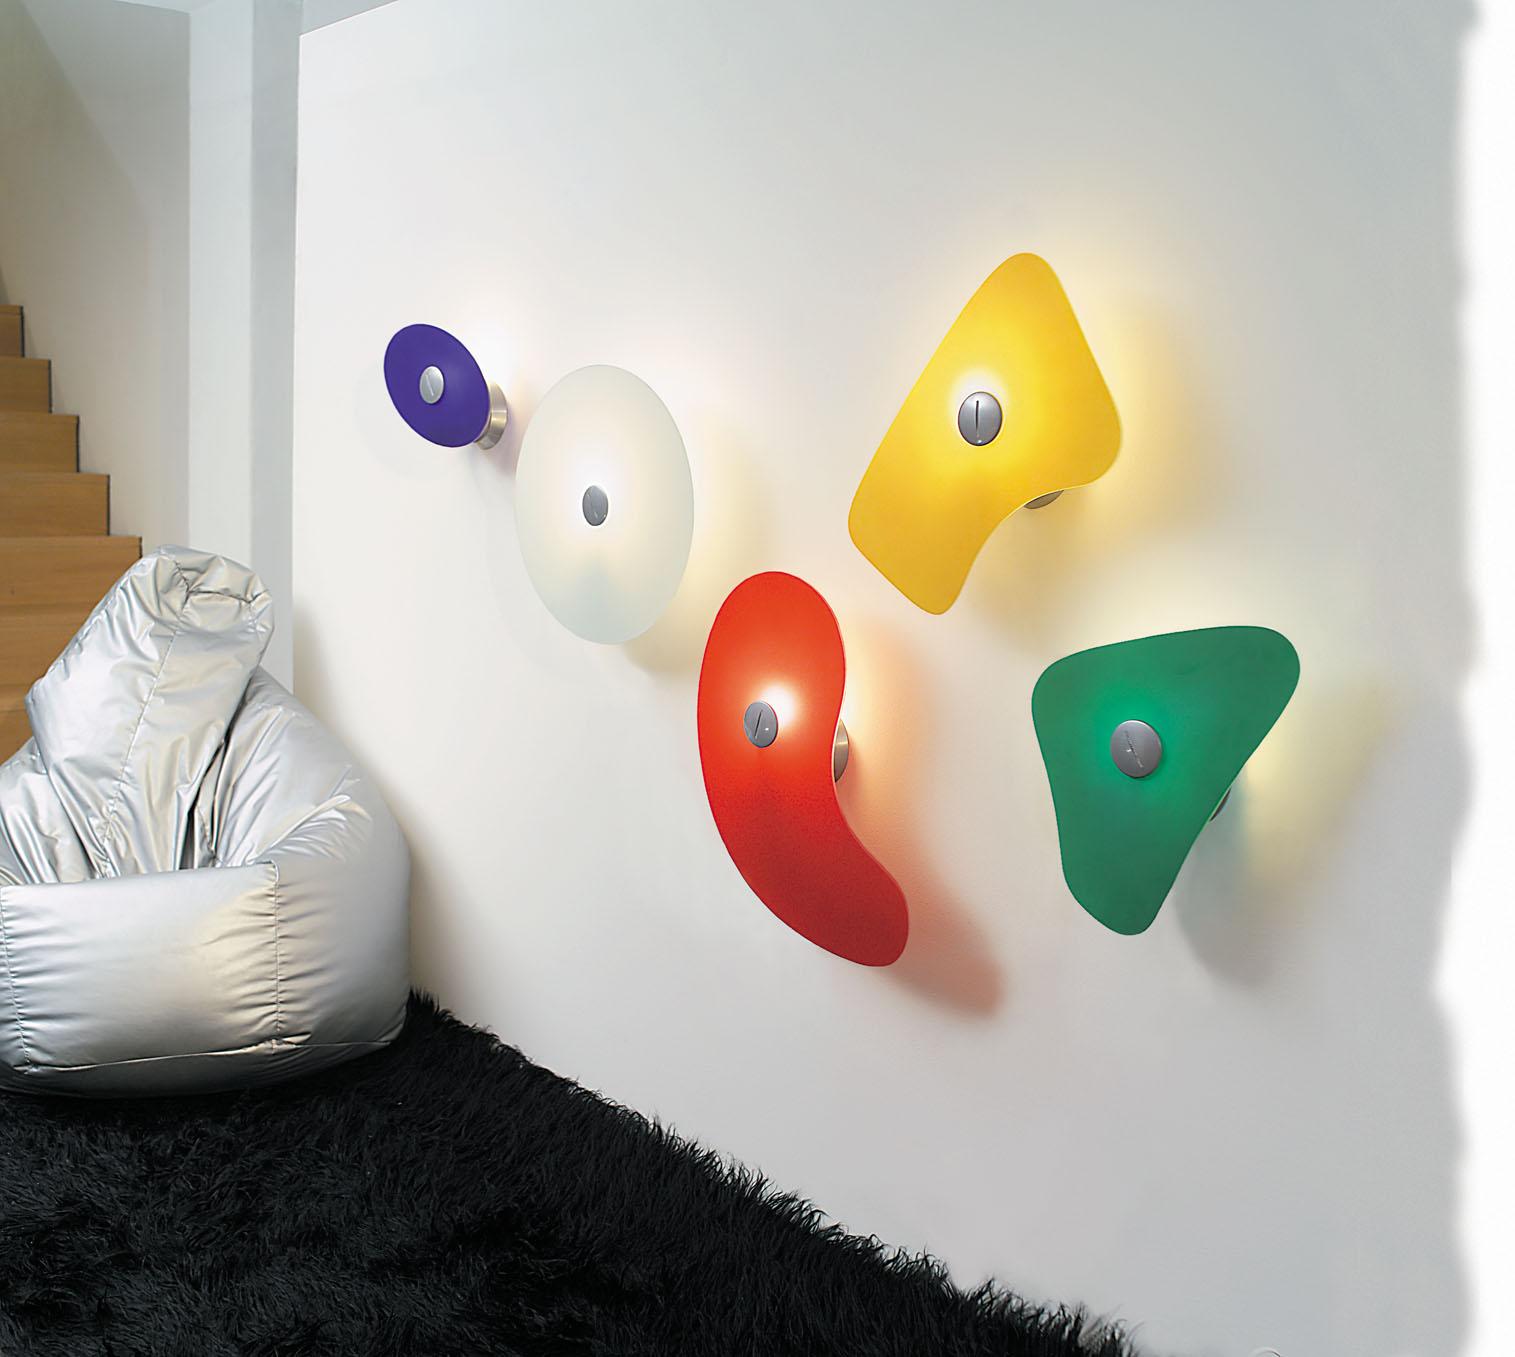 Wall lamp with reflected and diffused light. Wall fitting and wall rose in epoxy powder coated metal. Satin finish white or color painted glass diffuser, available in 5 different shaped and colored shapes, secured to the wall fitting using an epoxy